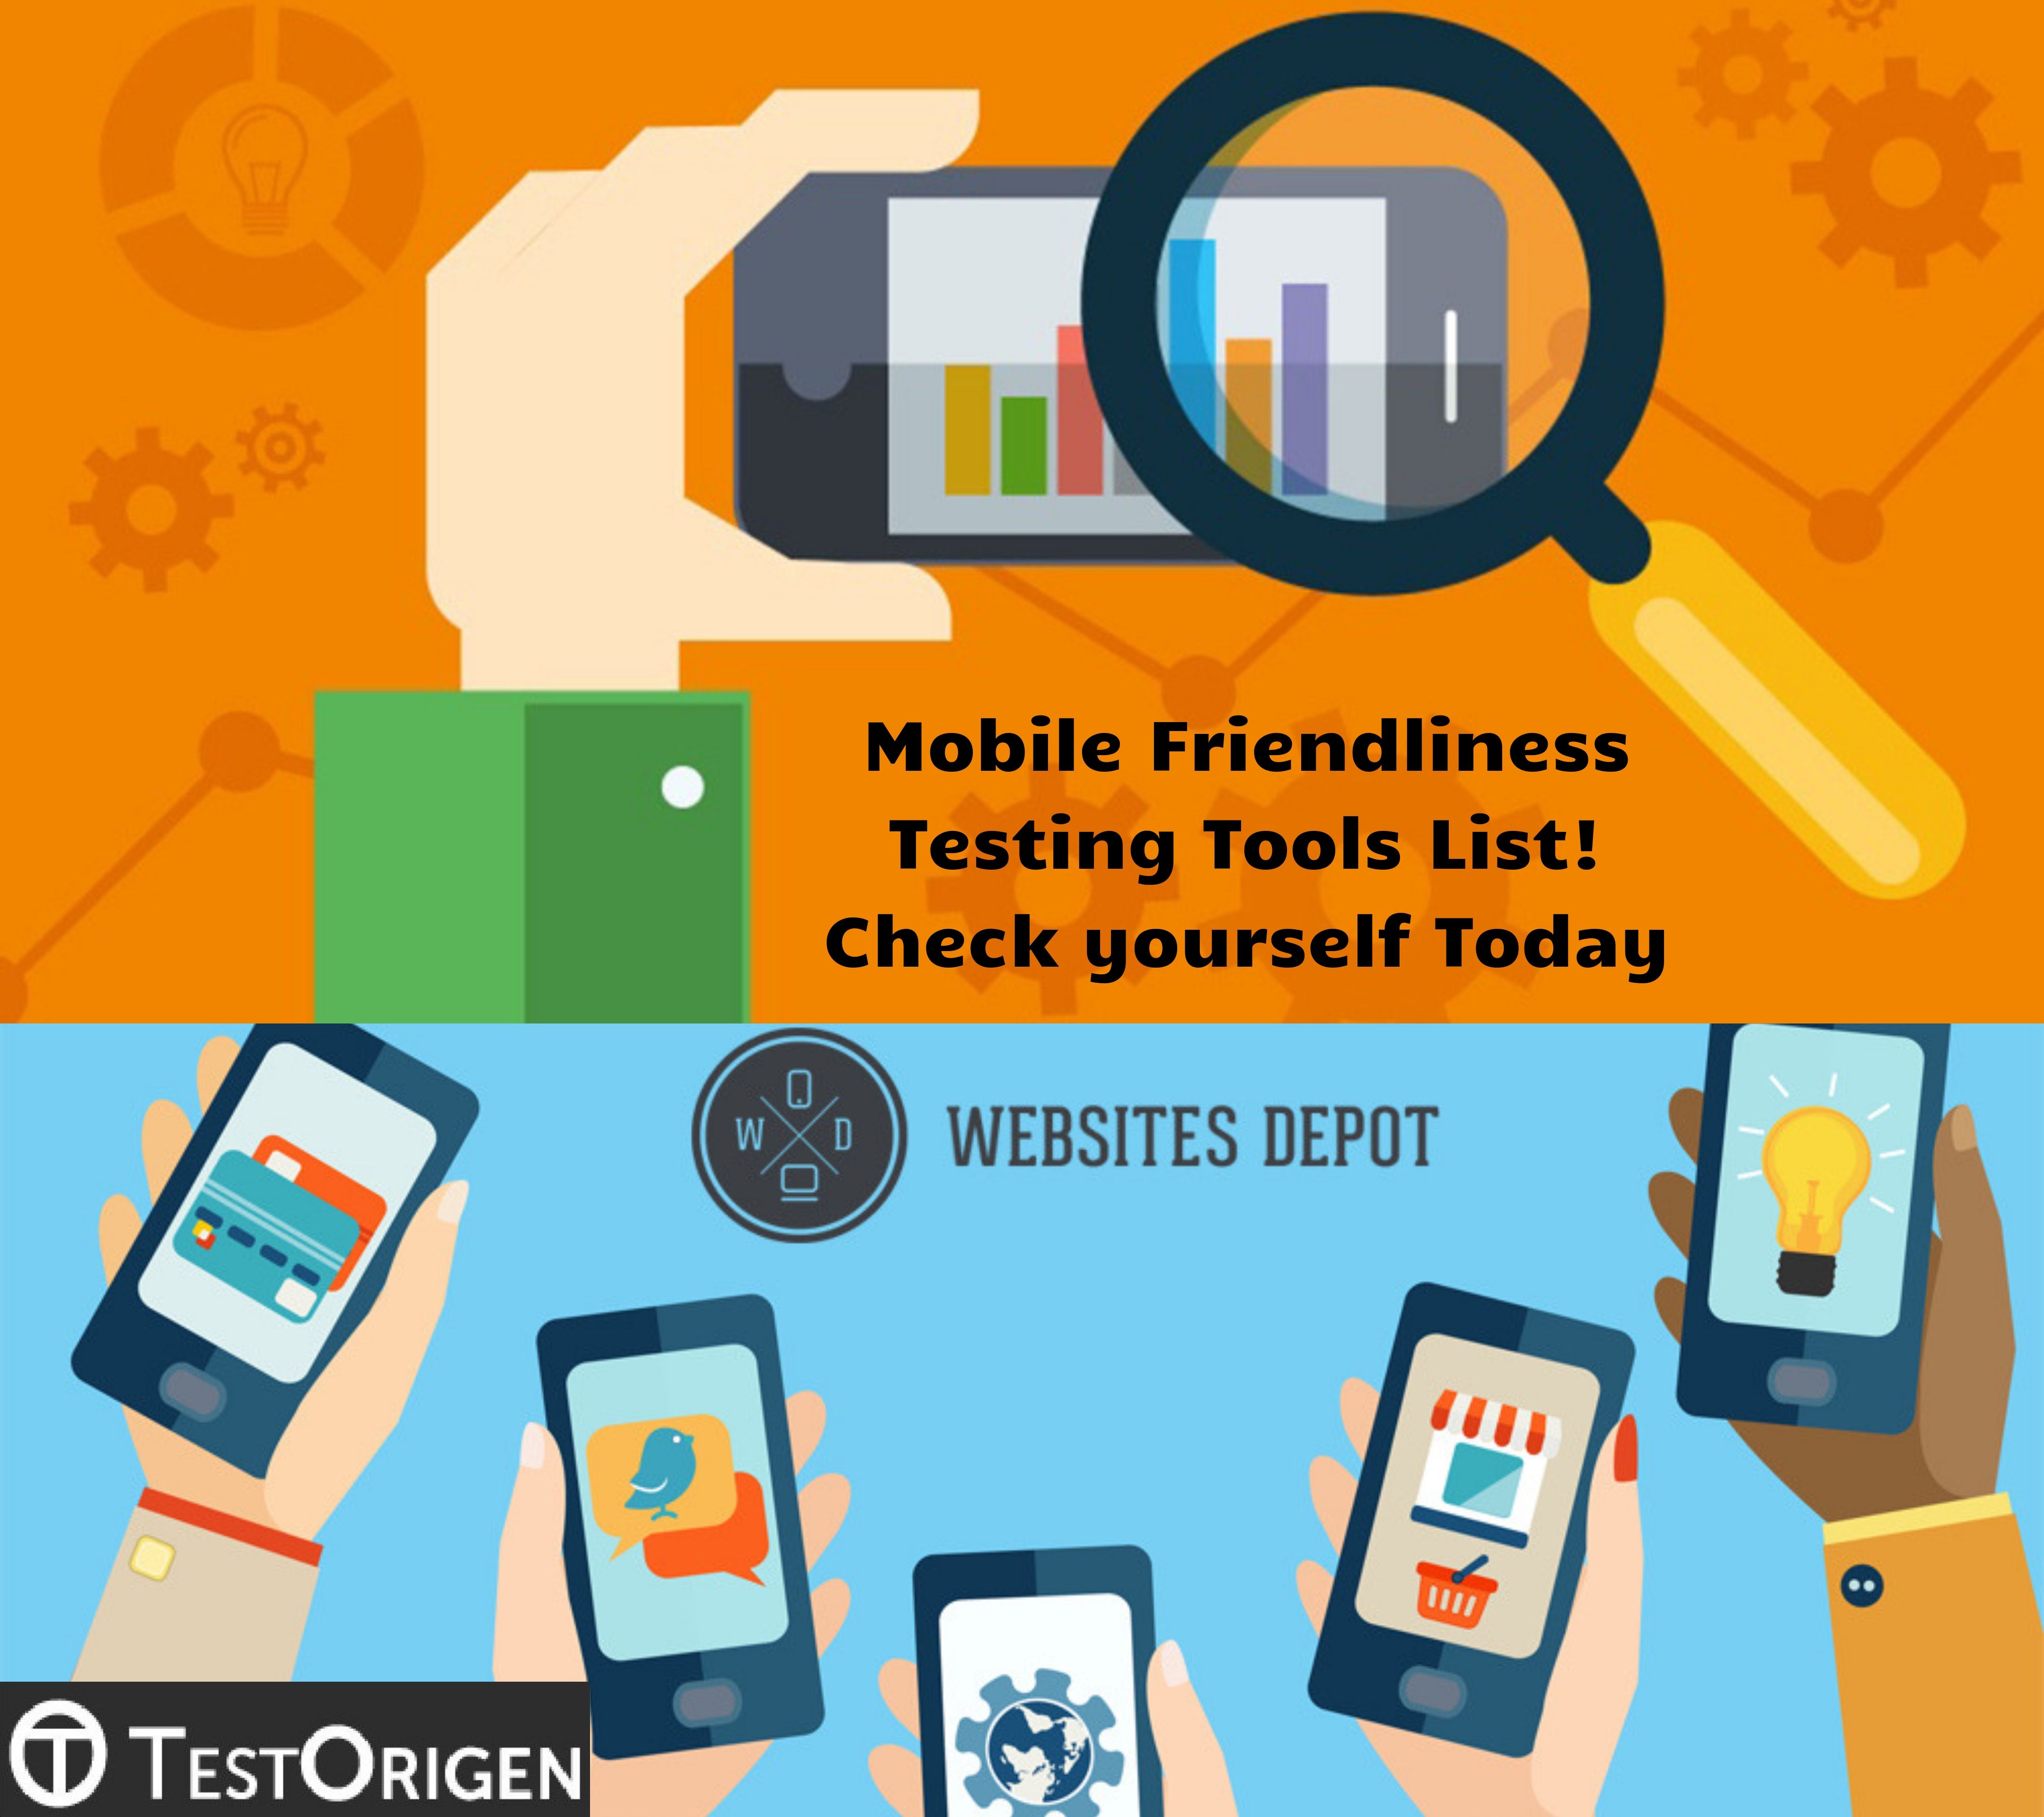 Mobile Friendliness Testing Tools List! Check yourself Today